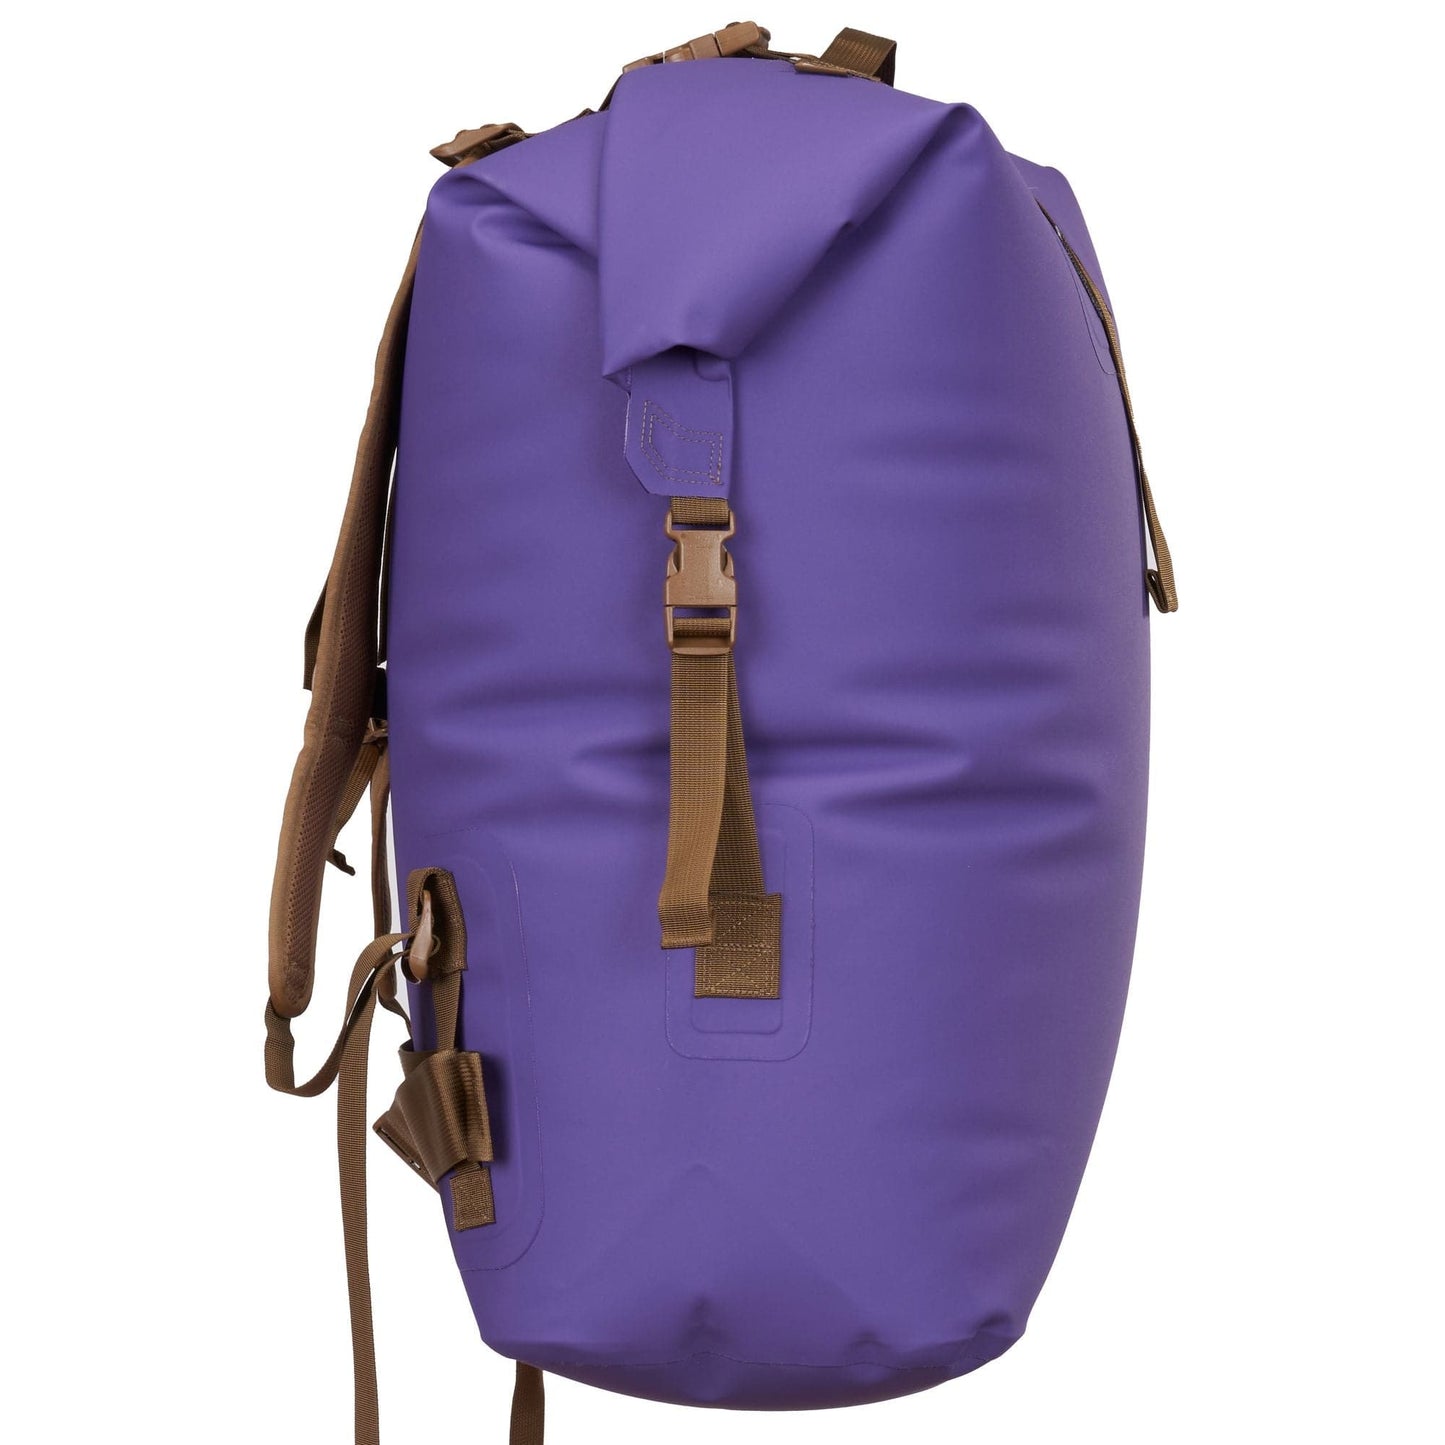 Featuring the Westwater Drypack dry bag manufactured by Watershed shown here from a third angle.